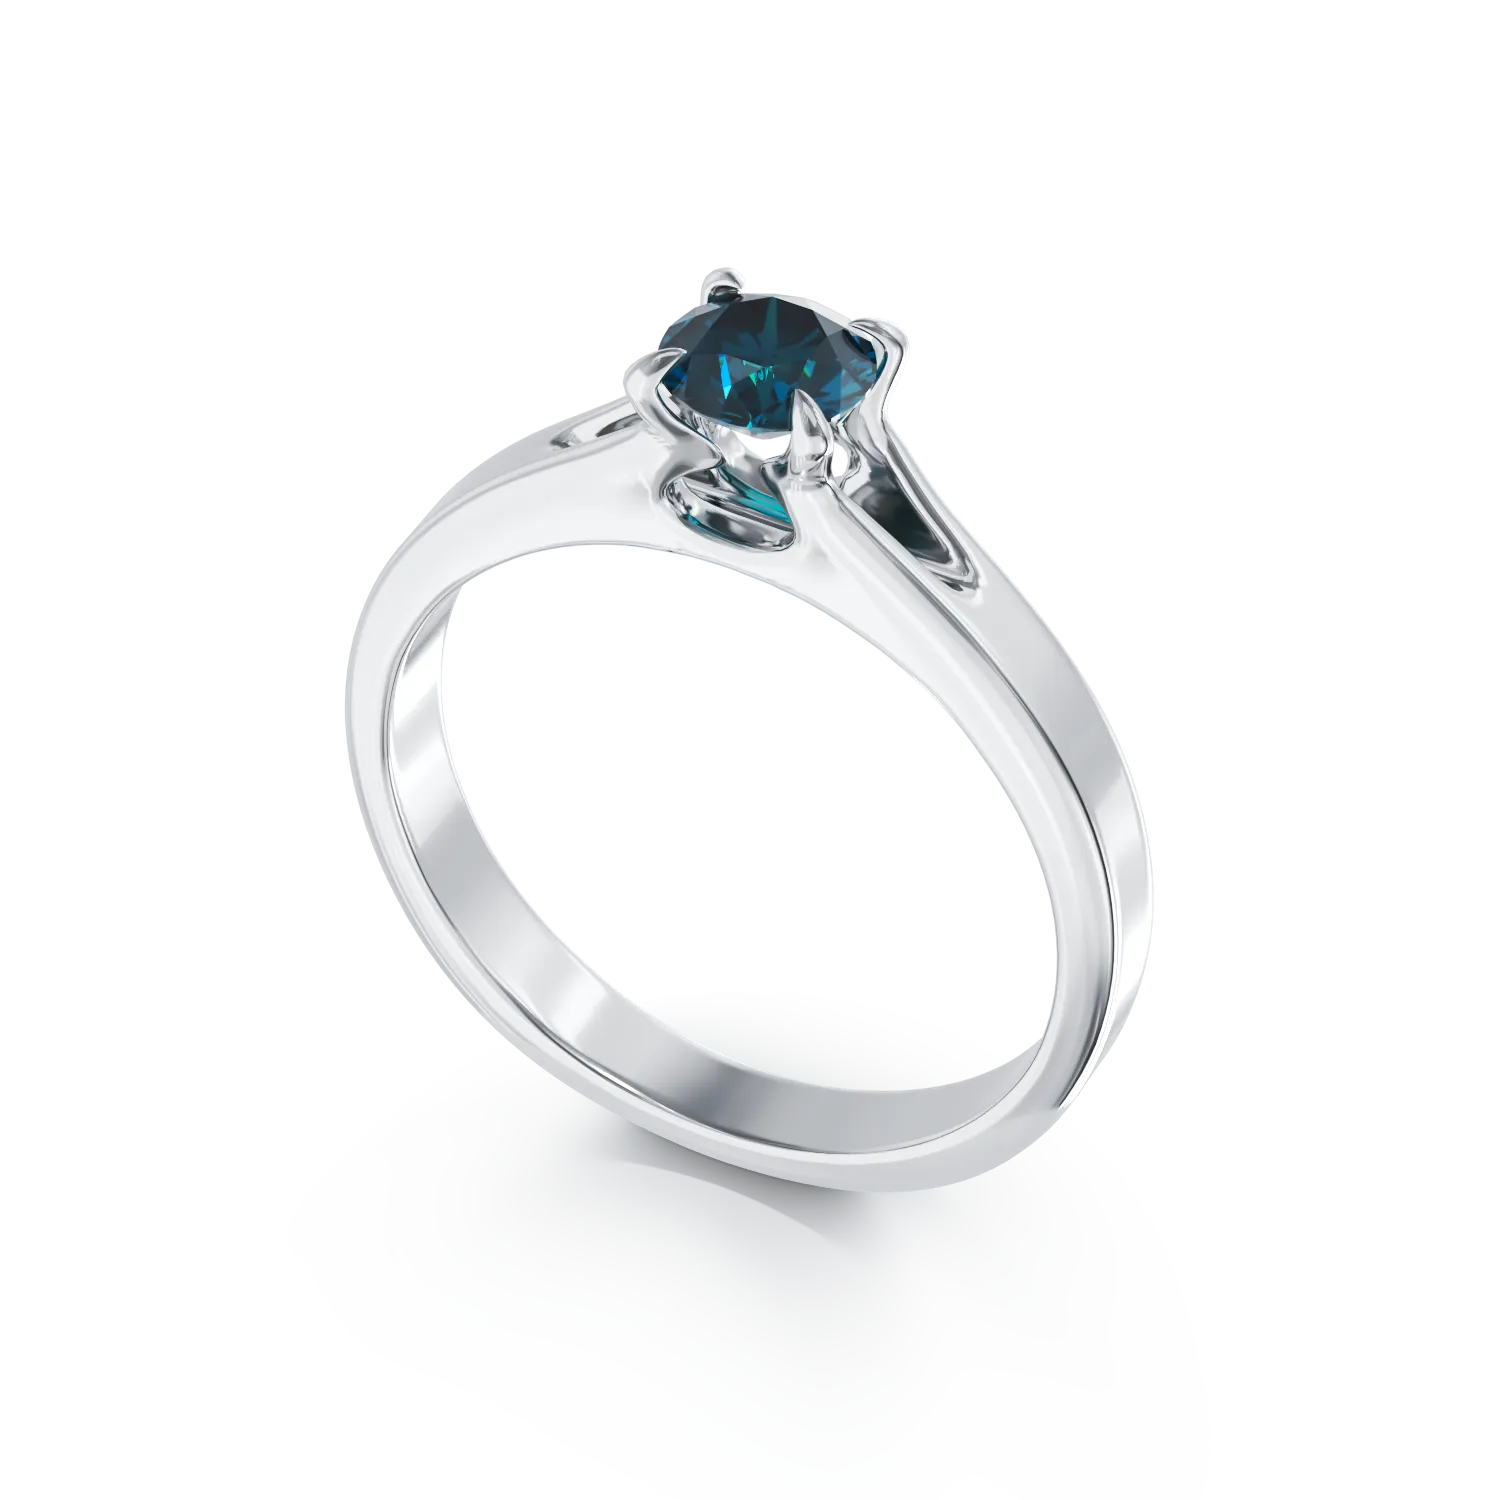 18K white gold engagement ring with a 0.44ct blue solitaire diamond